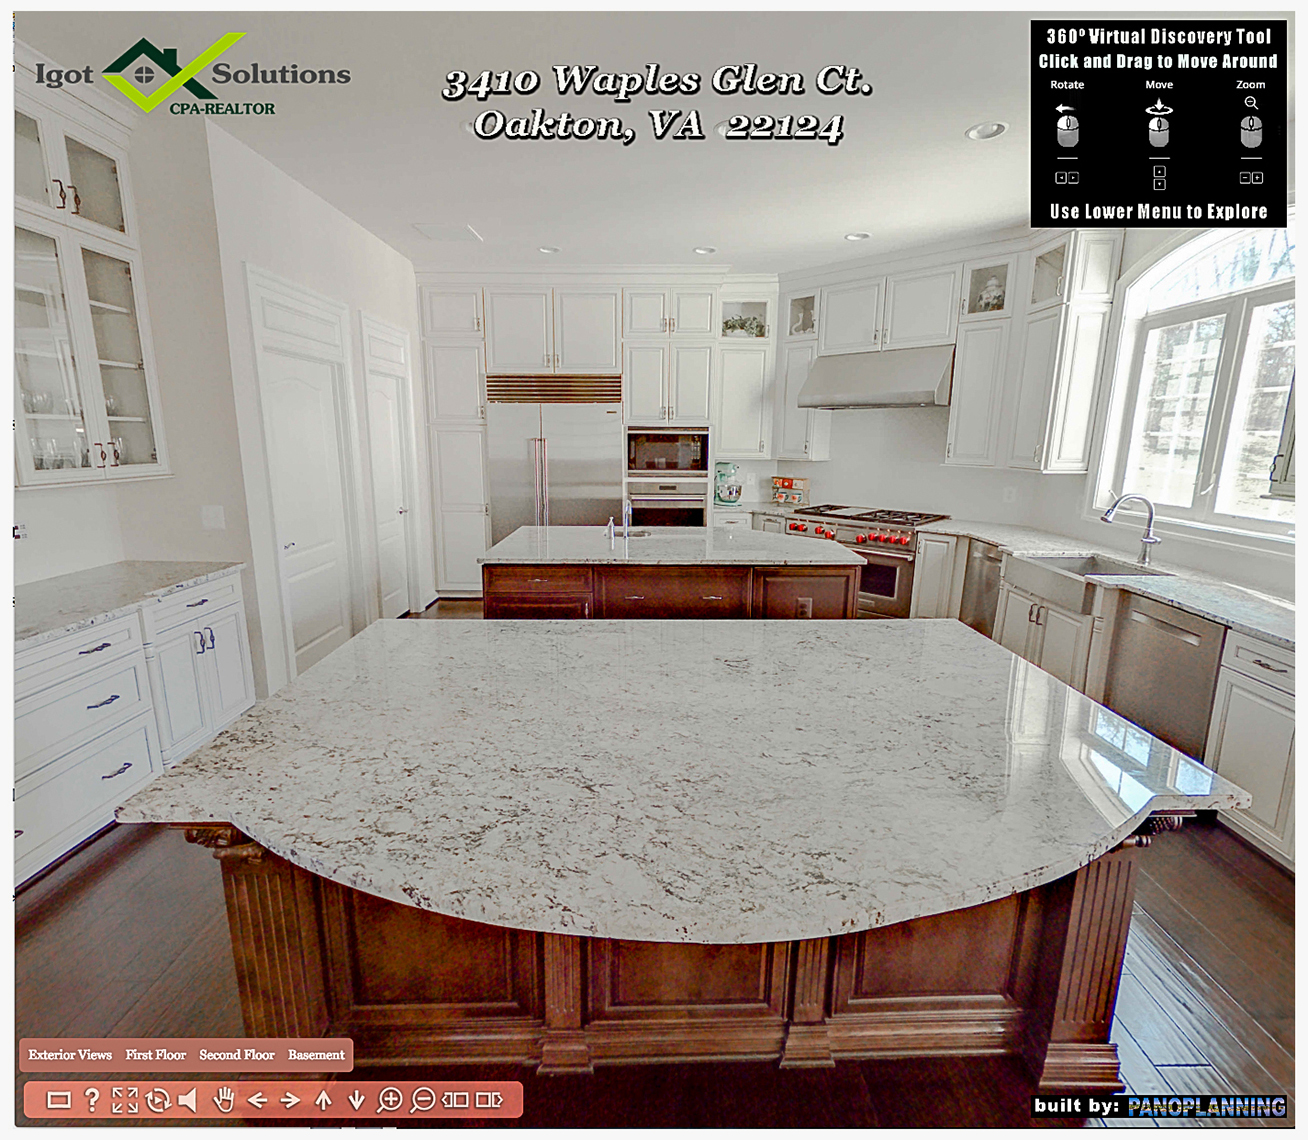 PanoPlanning's Interior Virtual Discovery Tour for real estate.